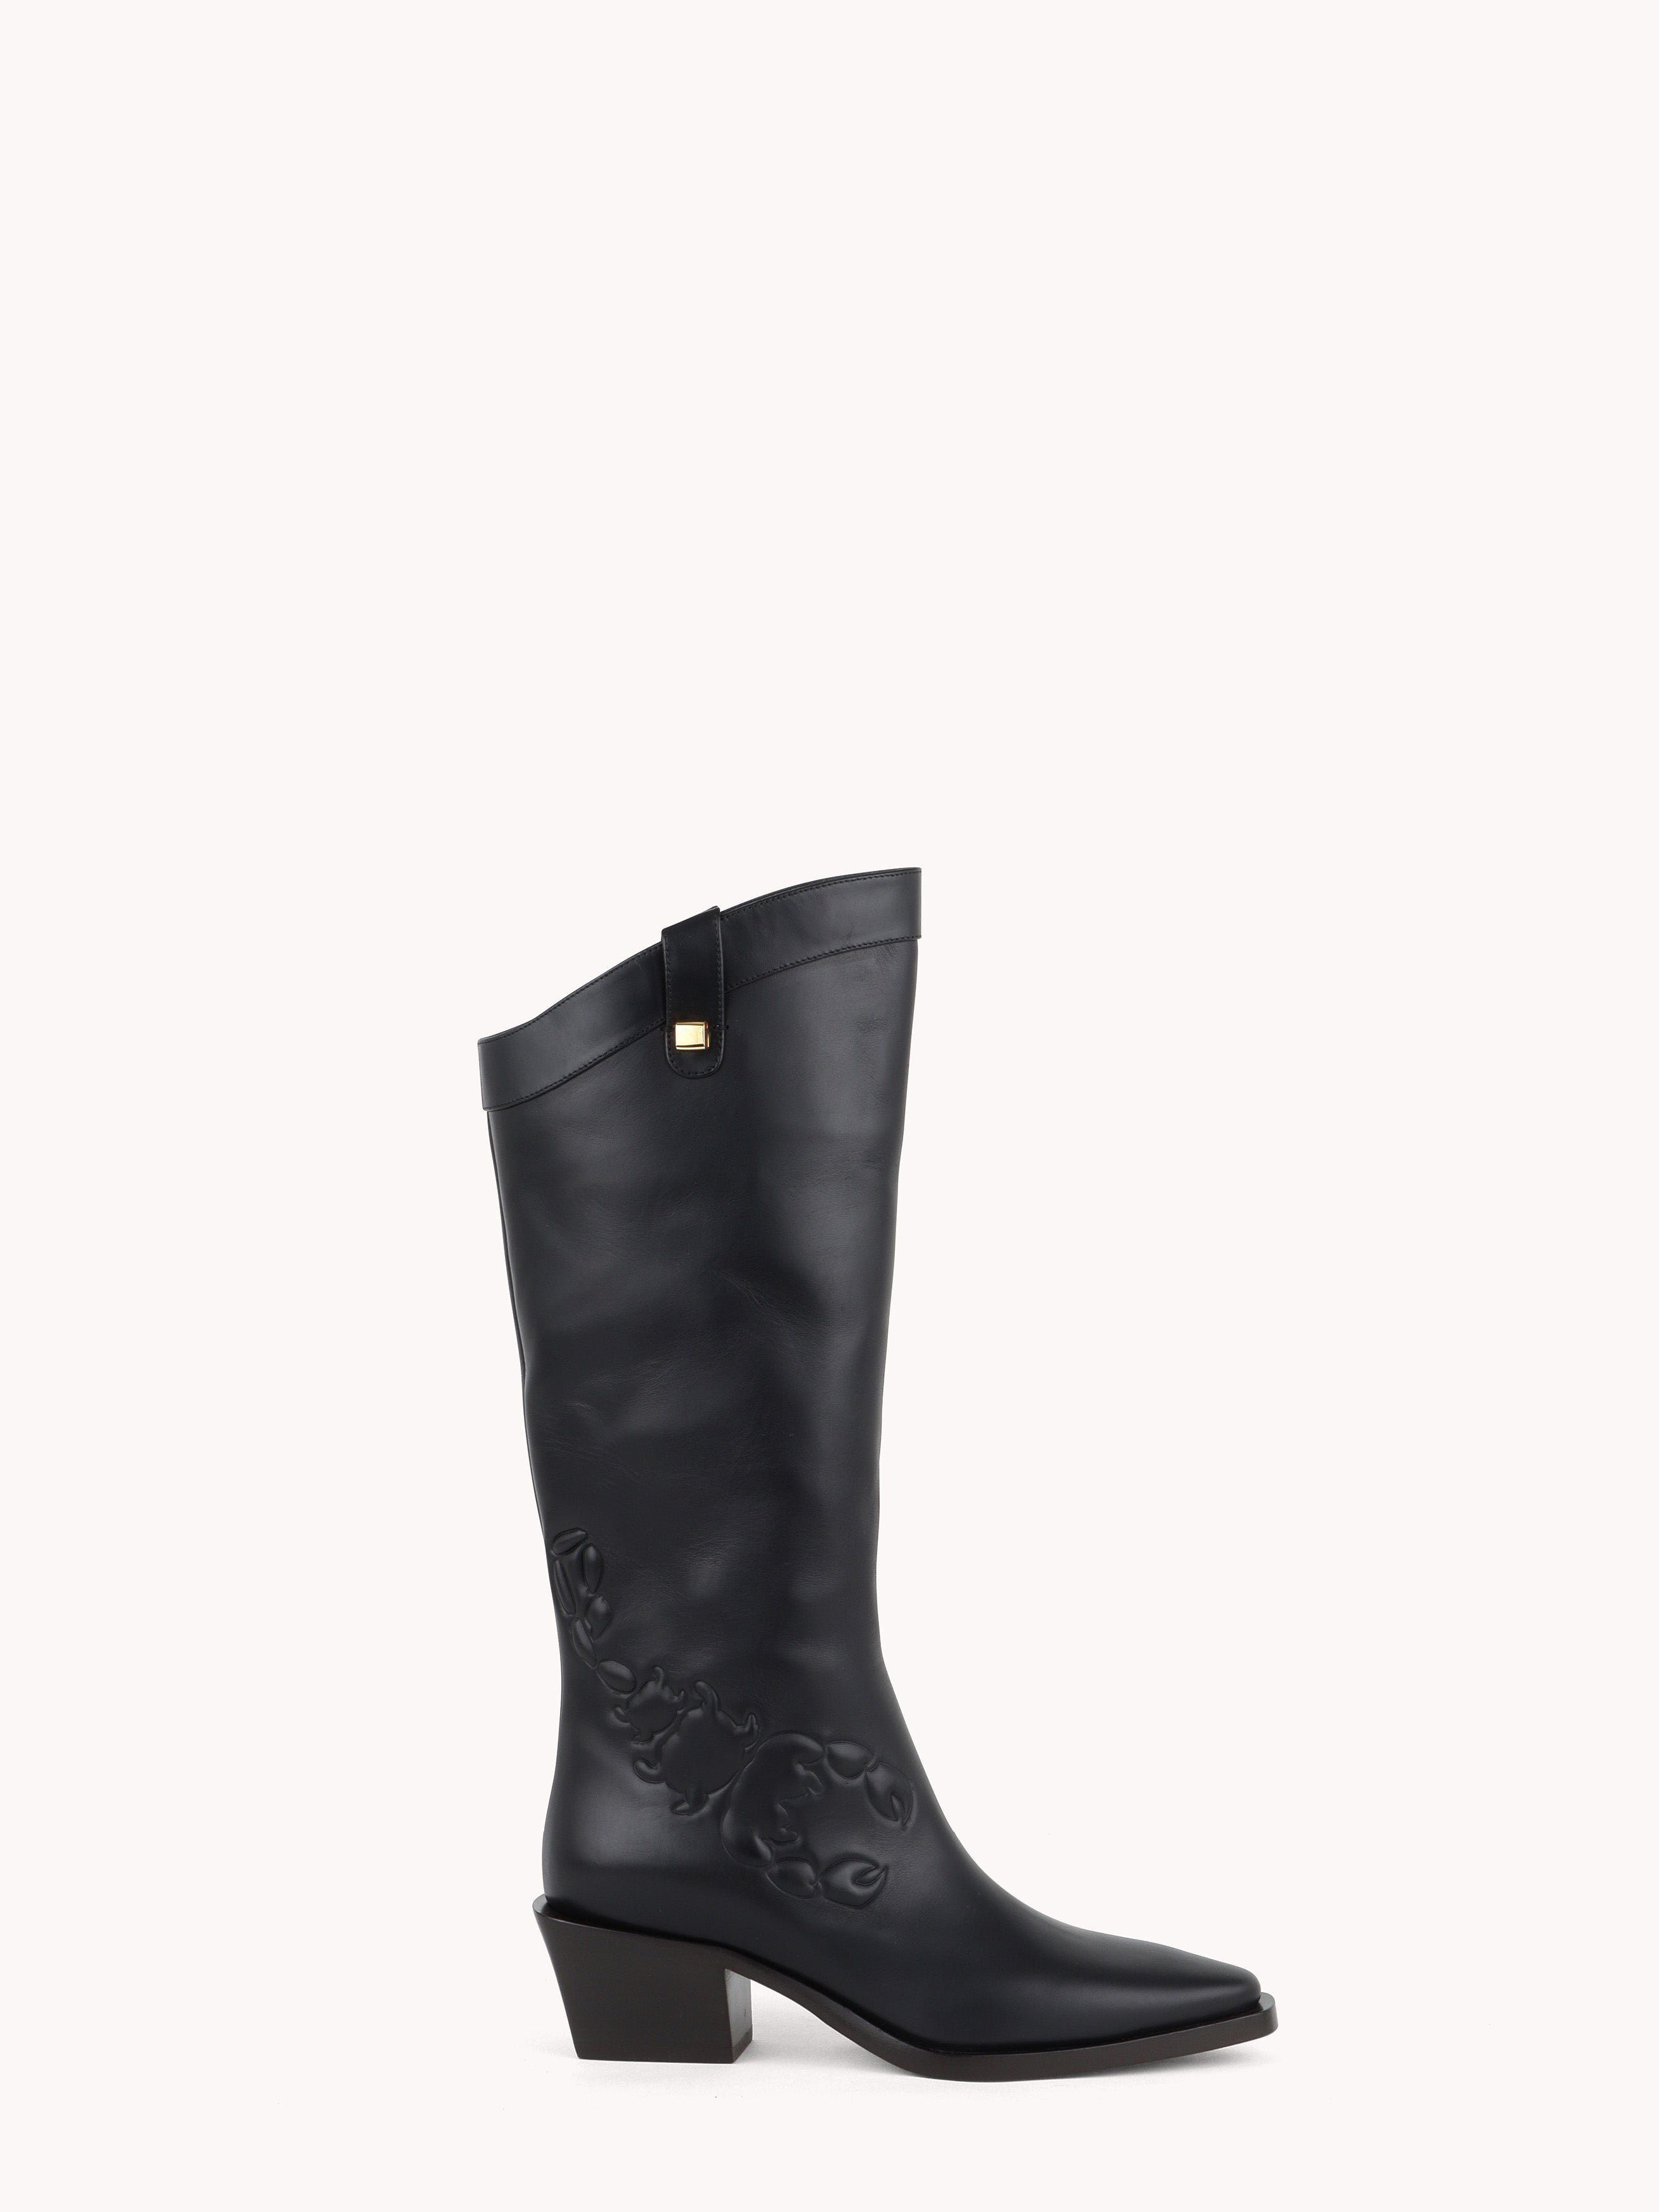 Sienna Black Nappa Leather Western Boots